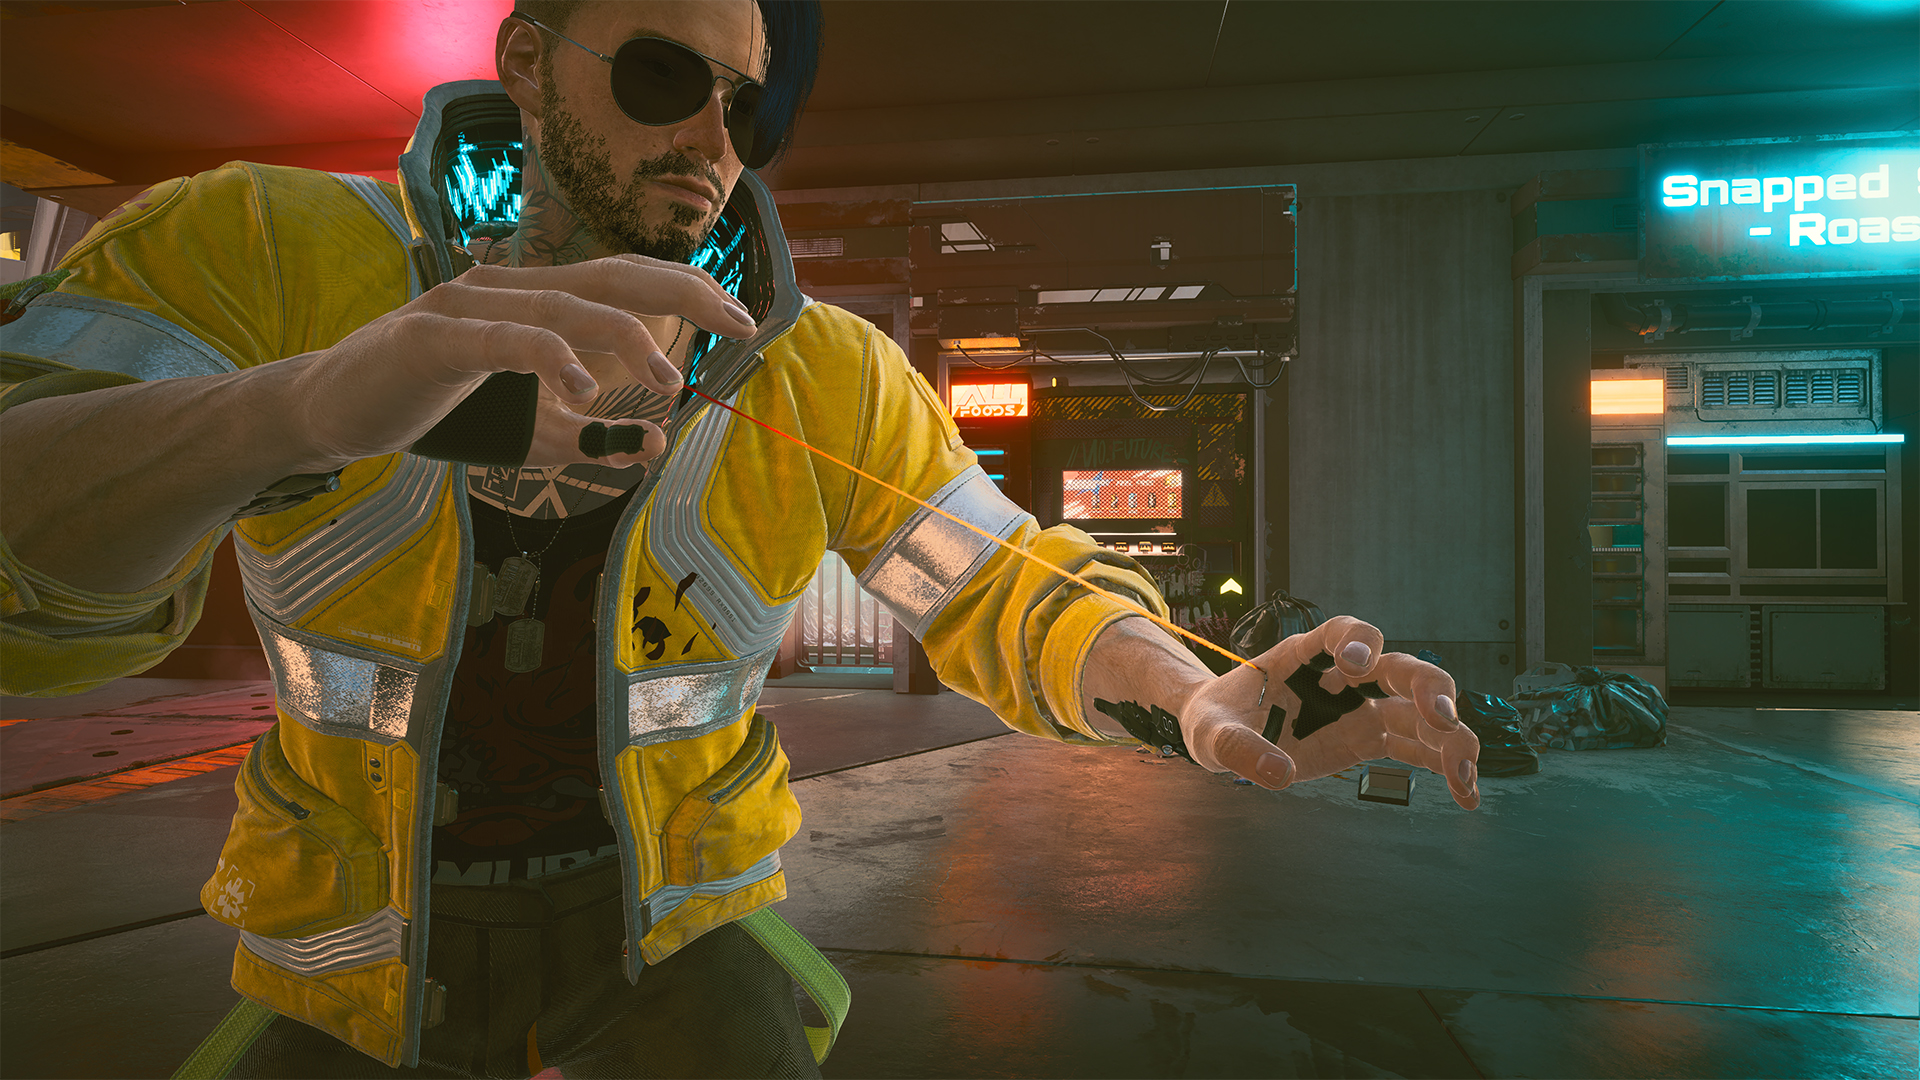 Cyberpunk 2077 build guide for Edgerunners anime characters